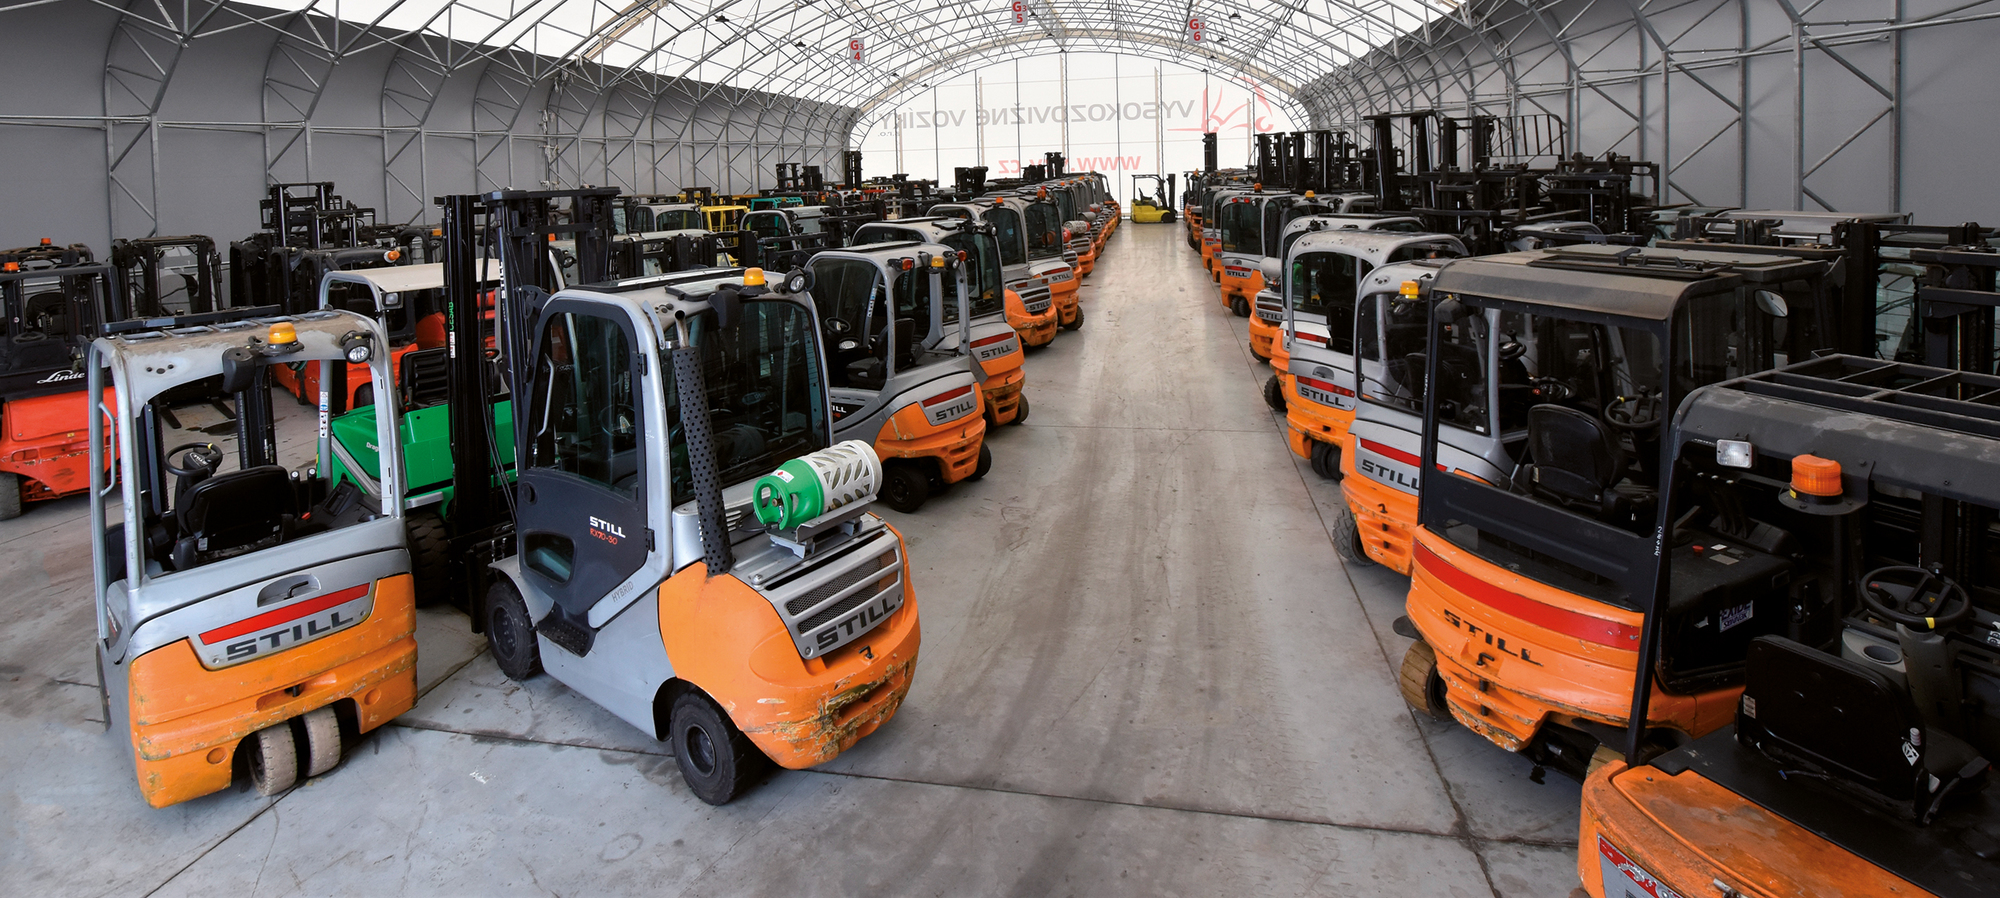 CHUF – cheap used forklifts undefined: 6 kép.